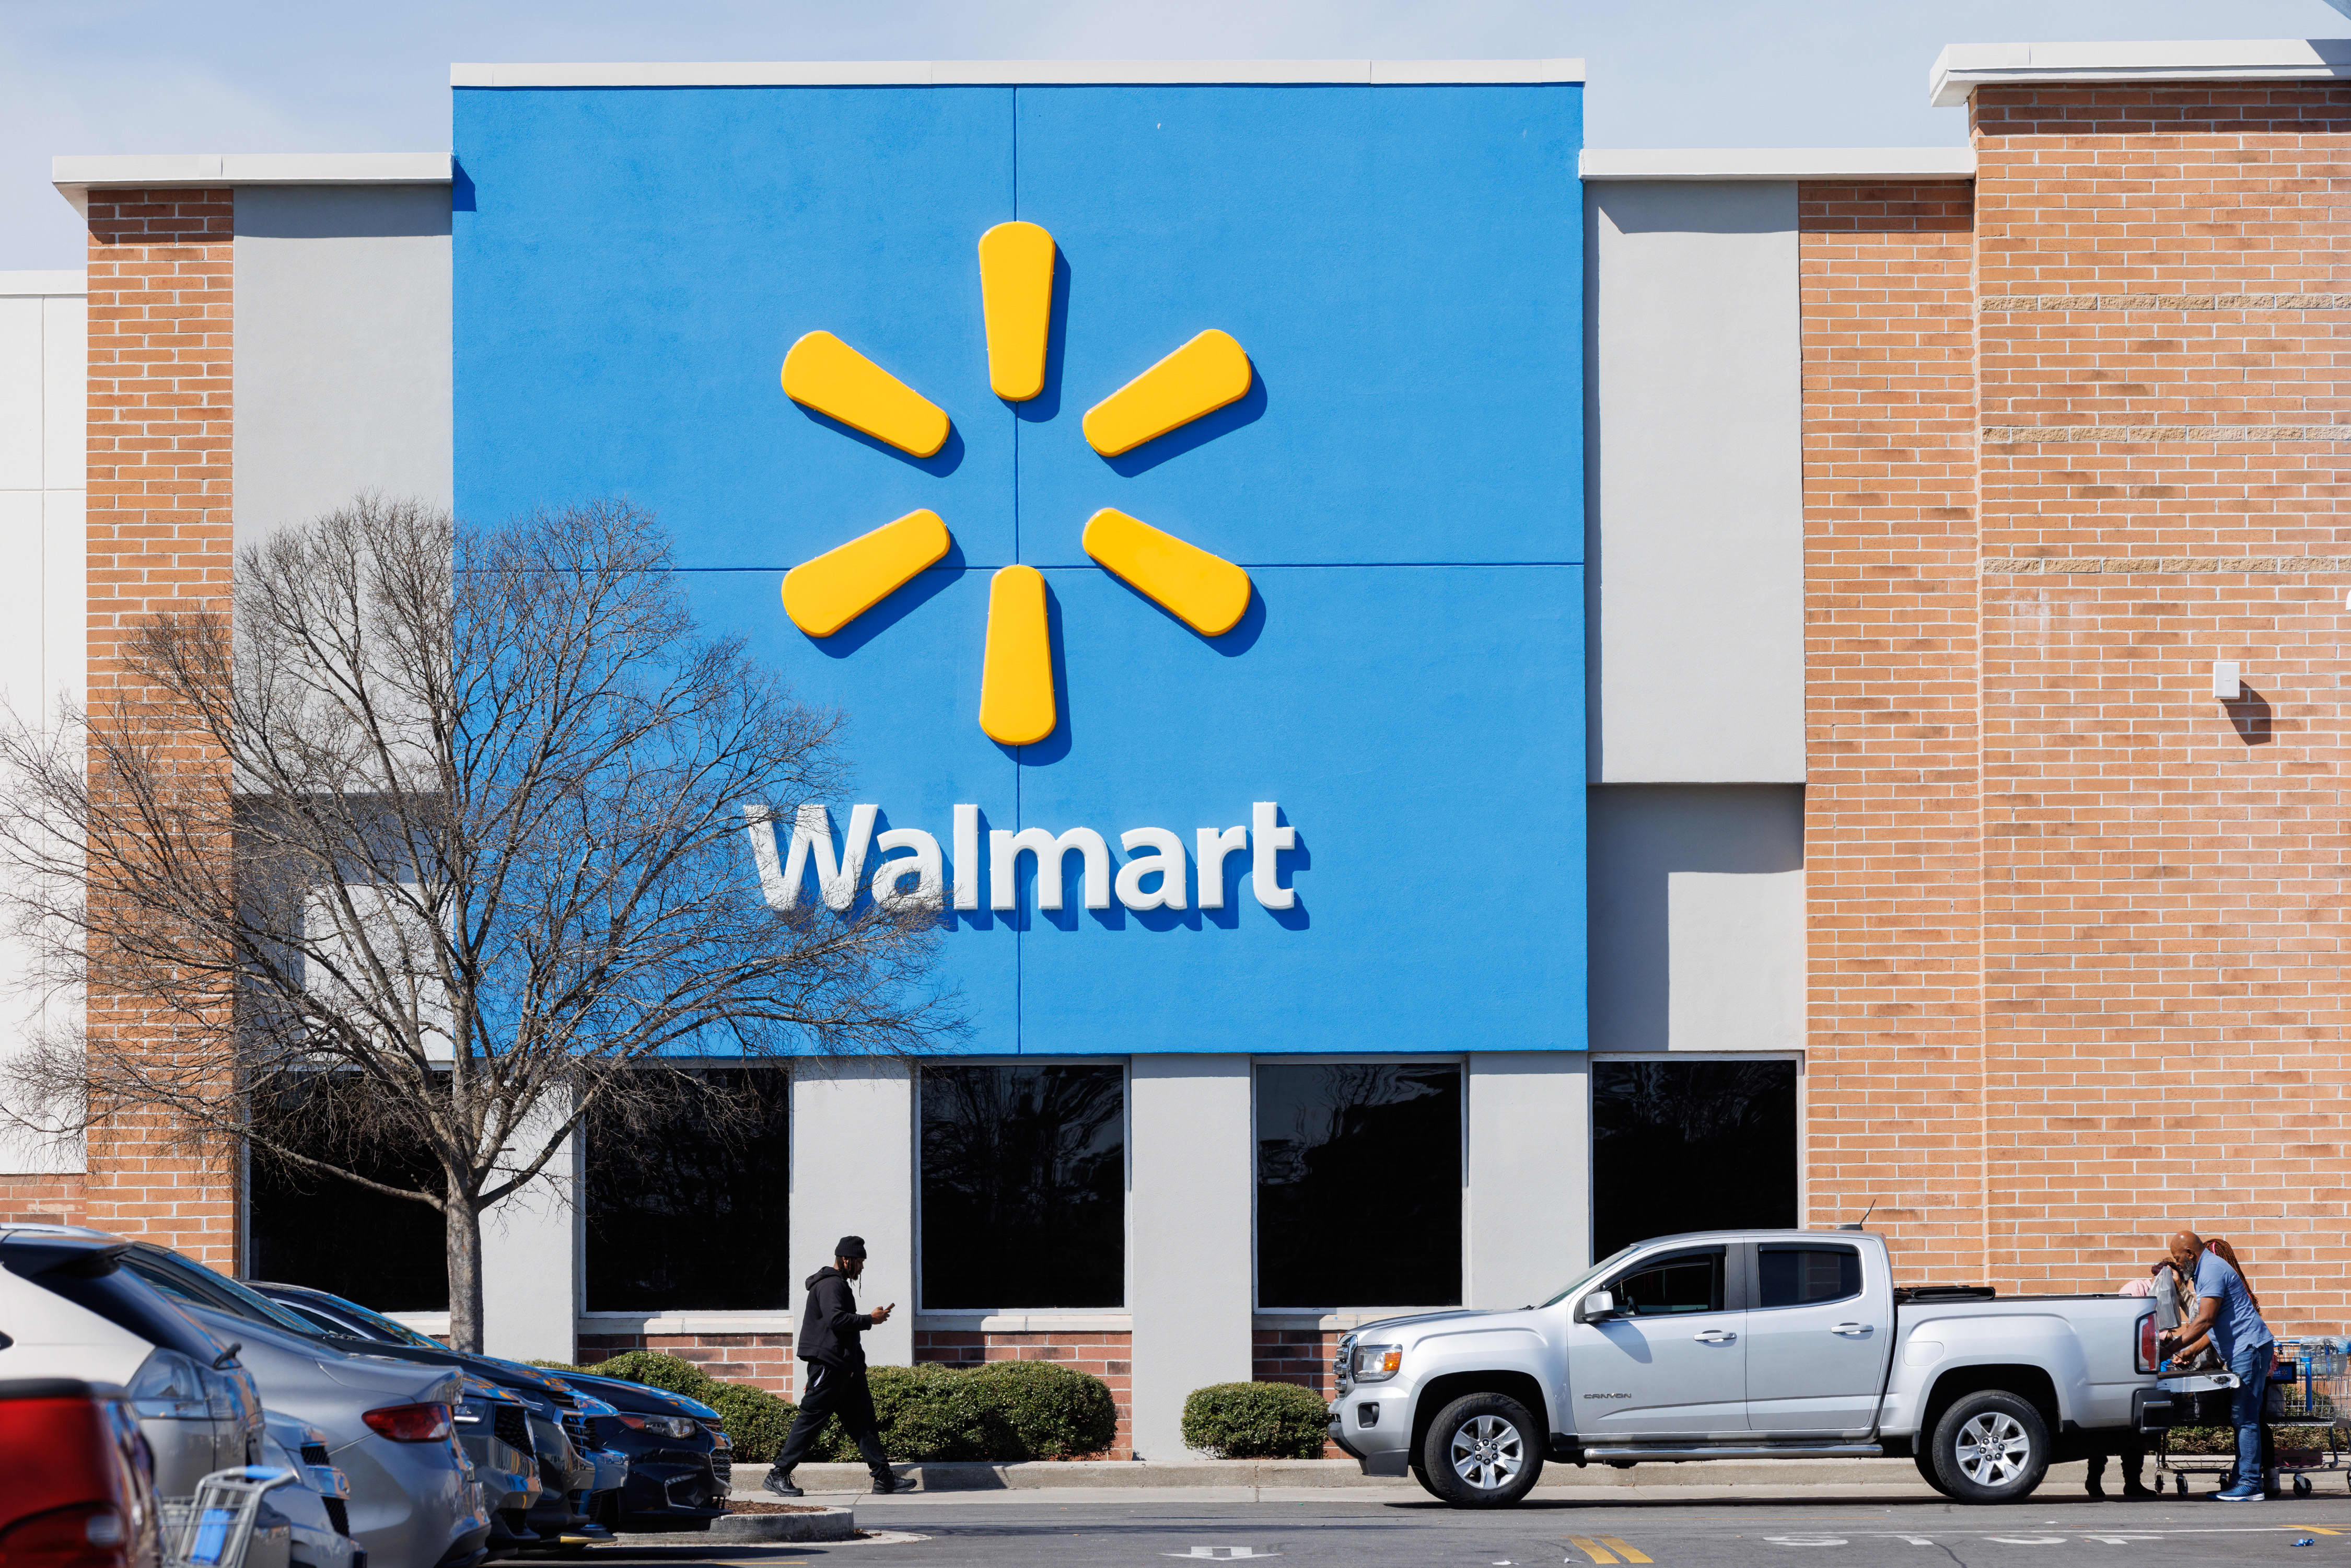 Live Now: Get Up to 40% Off Electronics, More During Walmart's 3-Day Sale